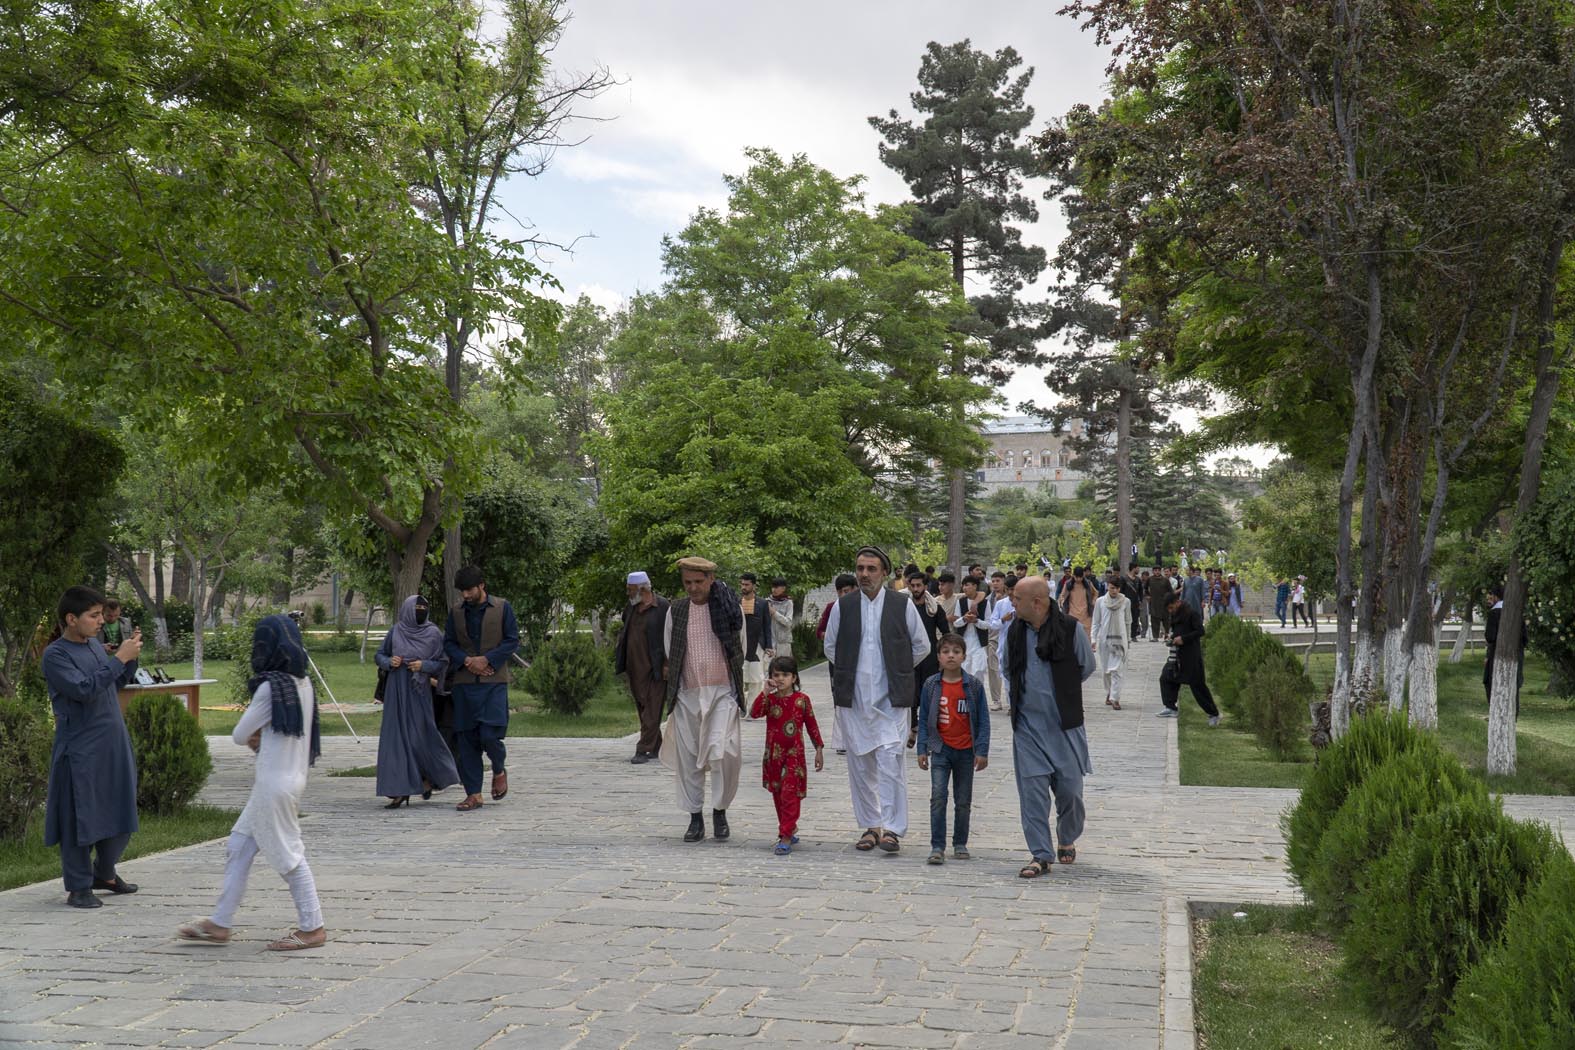 The garden provides respite from the everyday struggles of families in Kabul